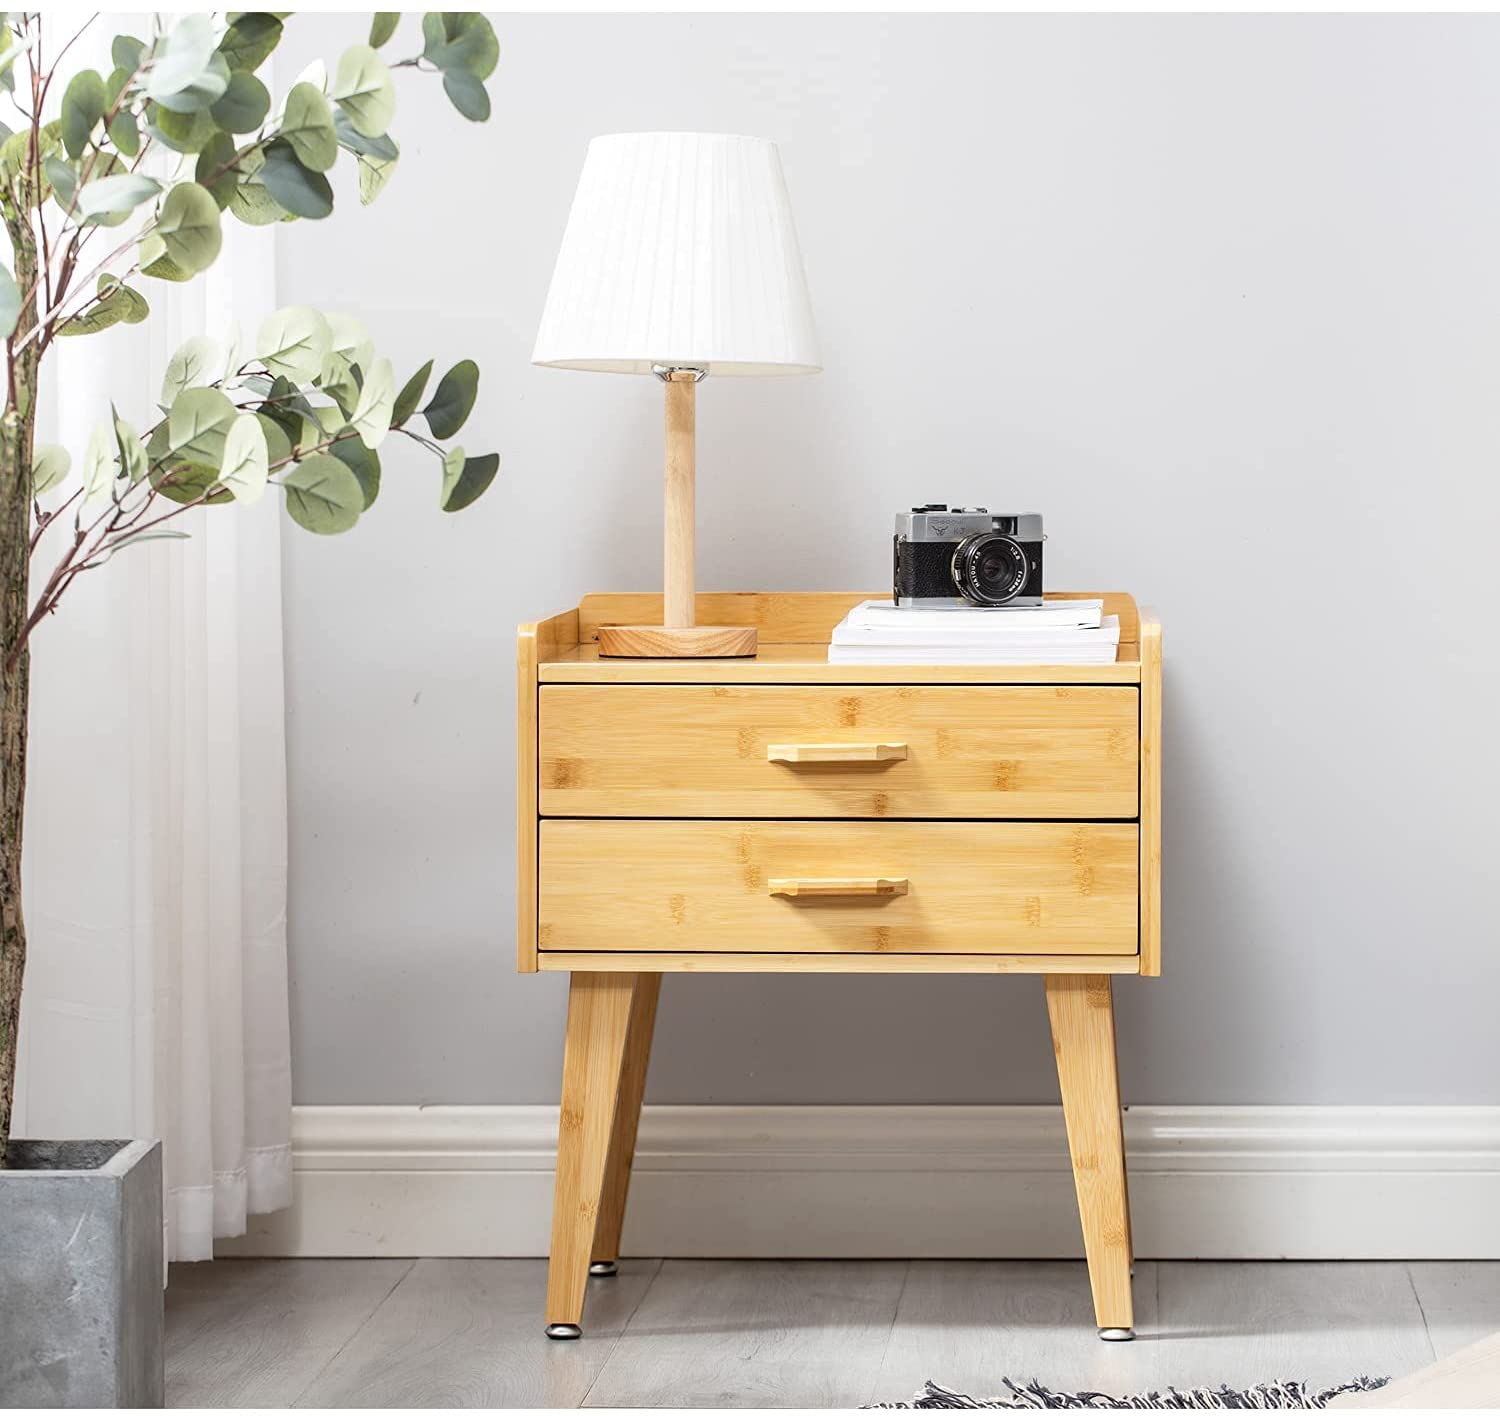 Bamboo Nightstand / Side Table with Drawers (Walnut or Wood Color)